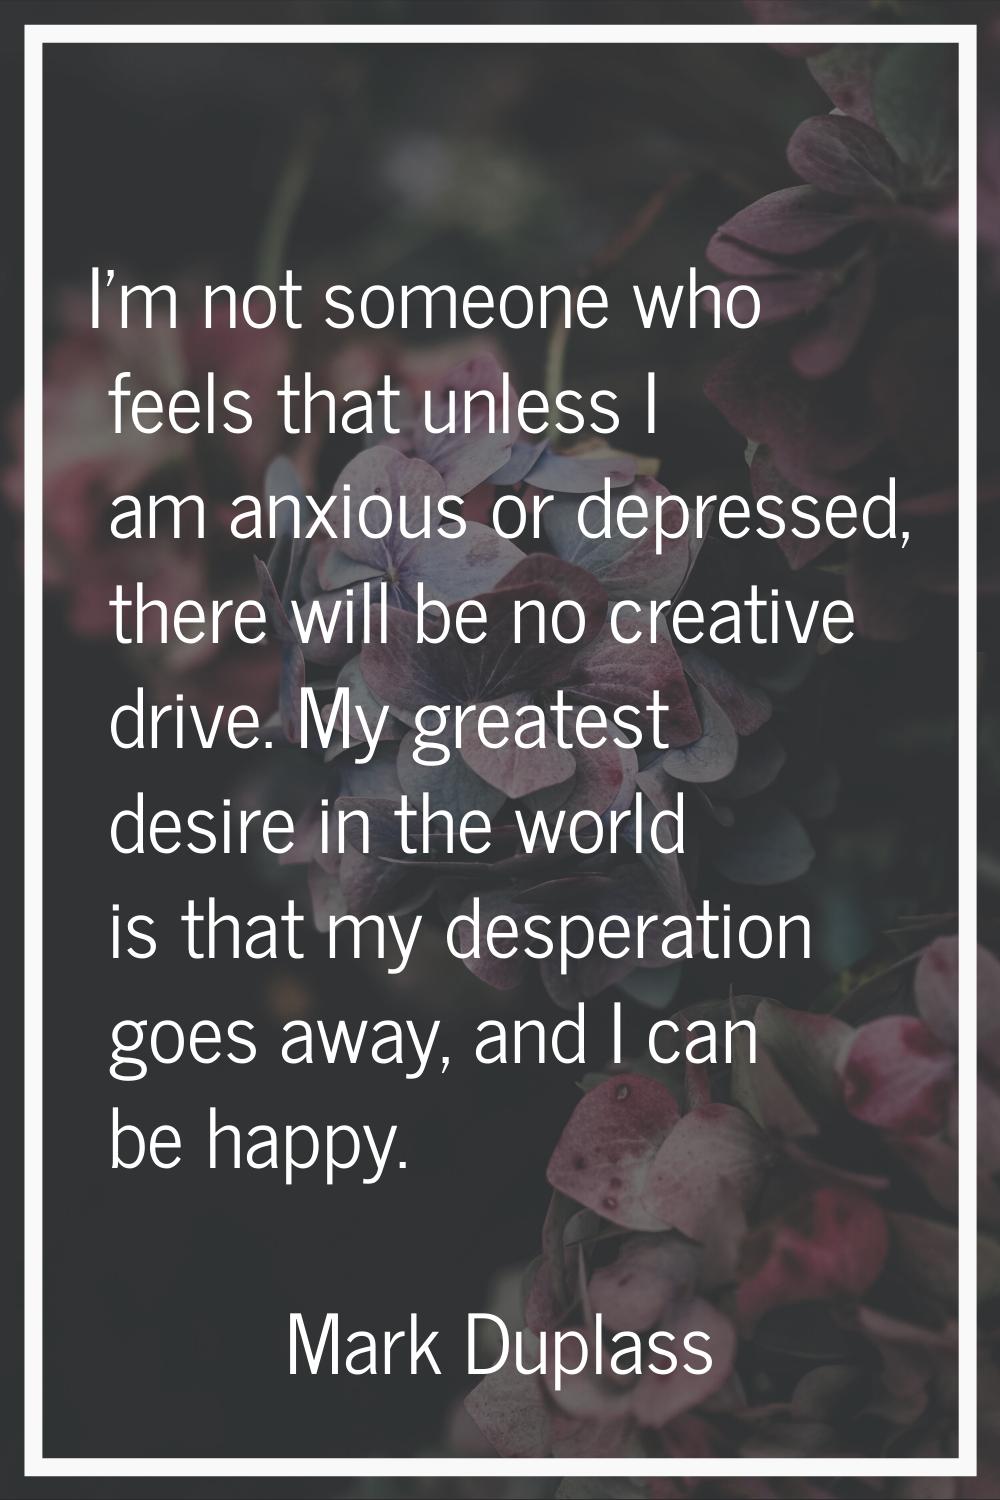 I'm not someone who feels that unless I am anxious or depressed, there will be no creative drive. M